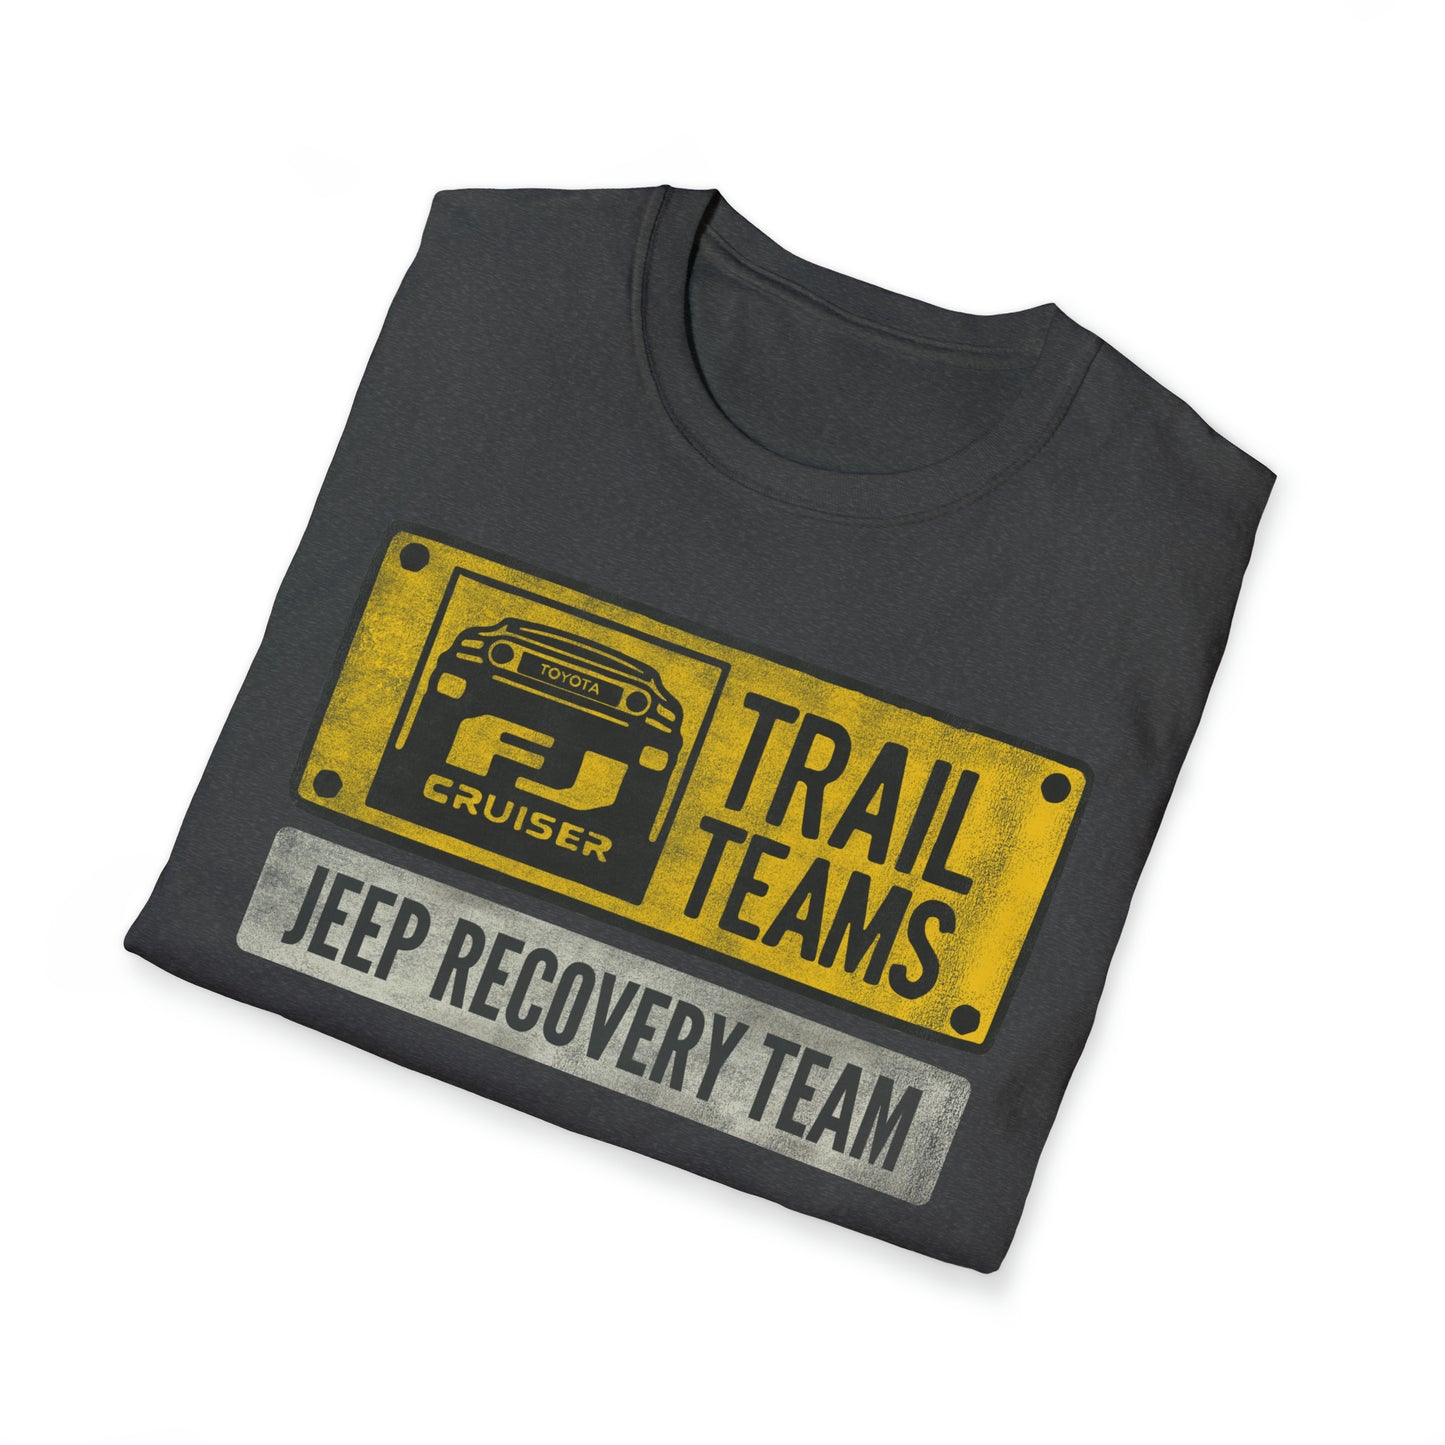 FJC Trail Teams Jeep Recovery:  Unisex Softstyle T-Shirt